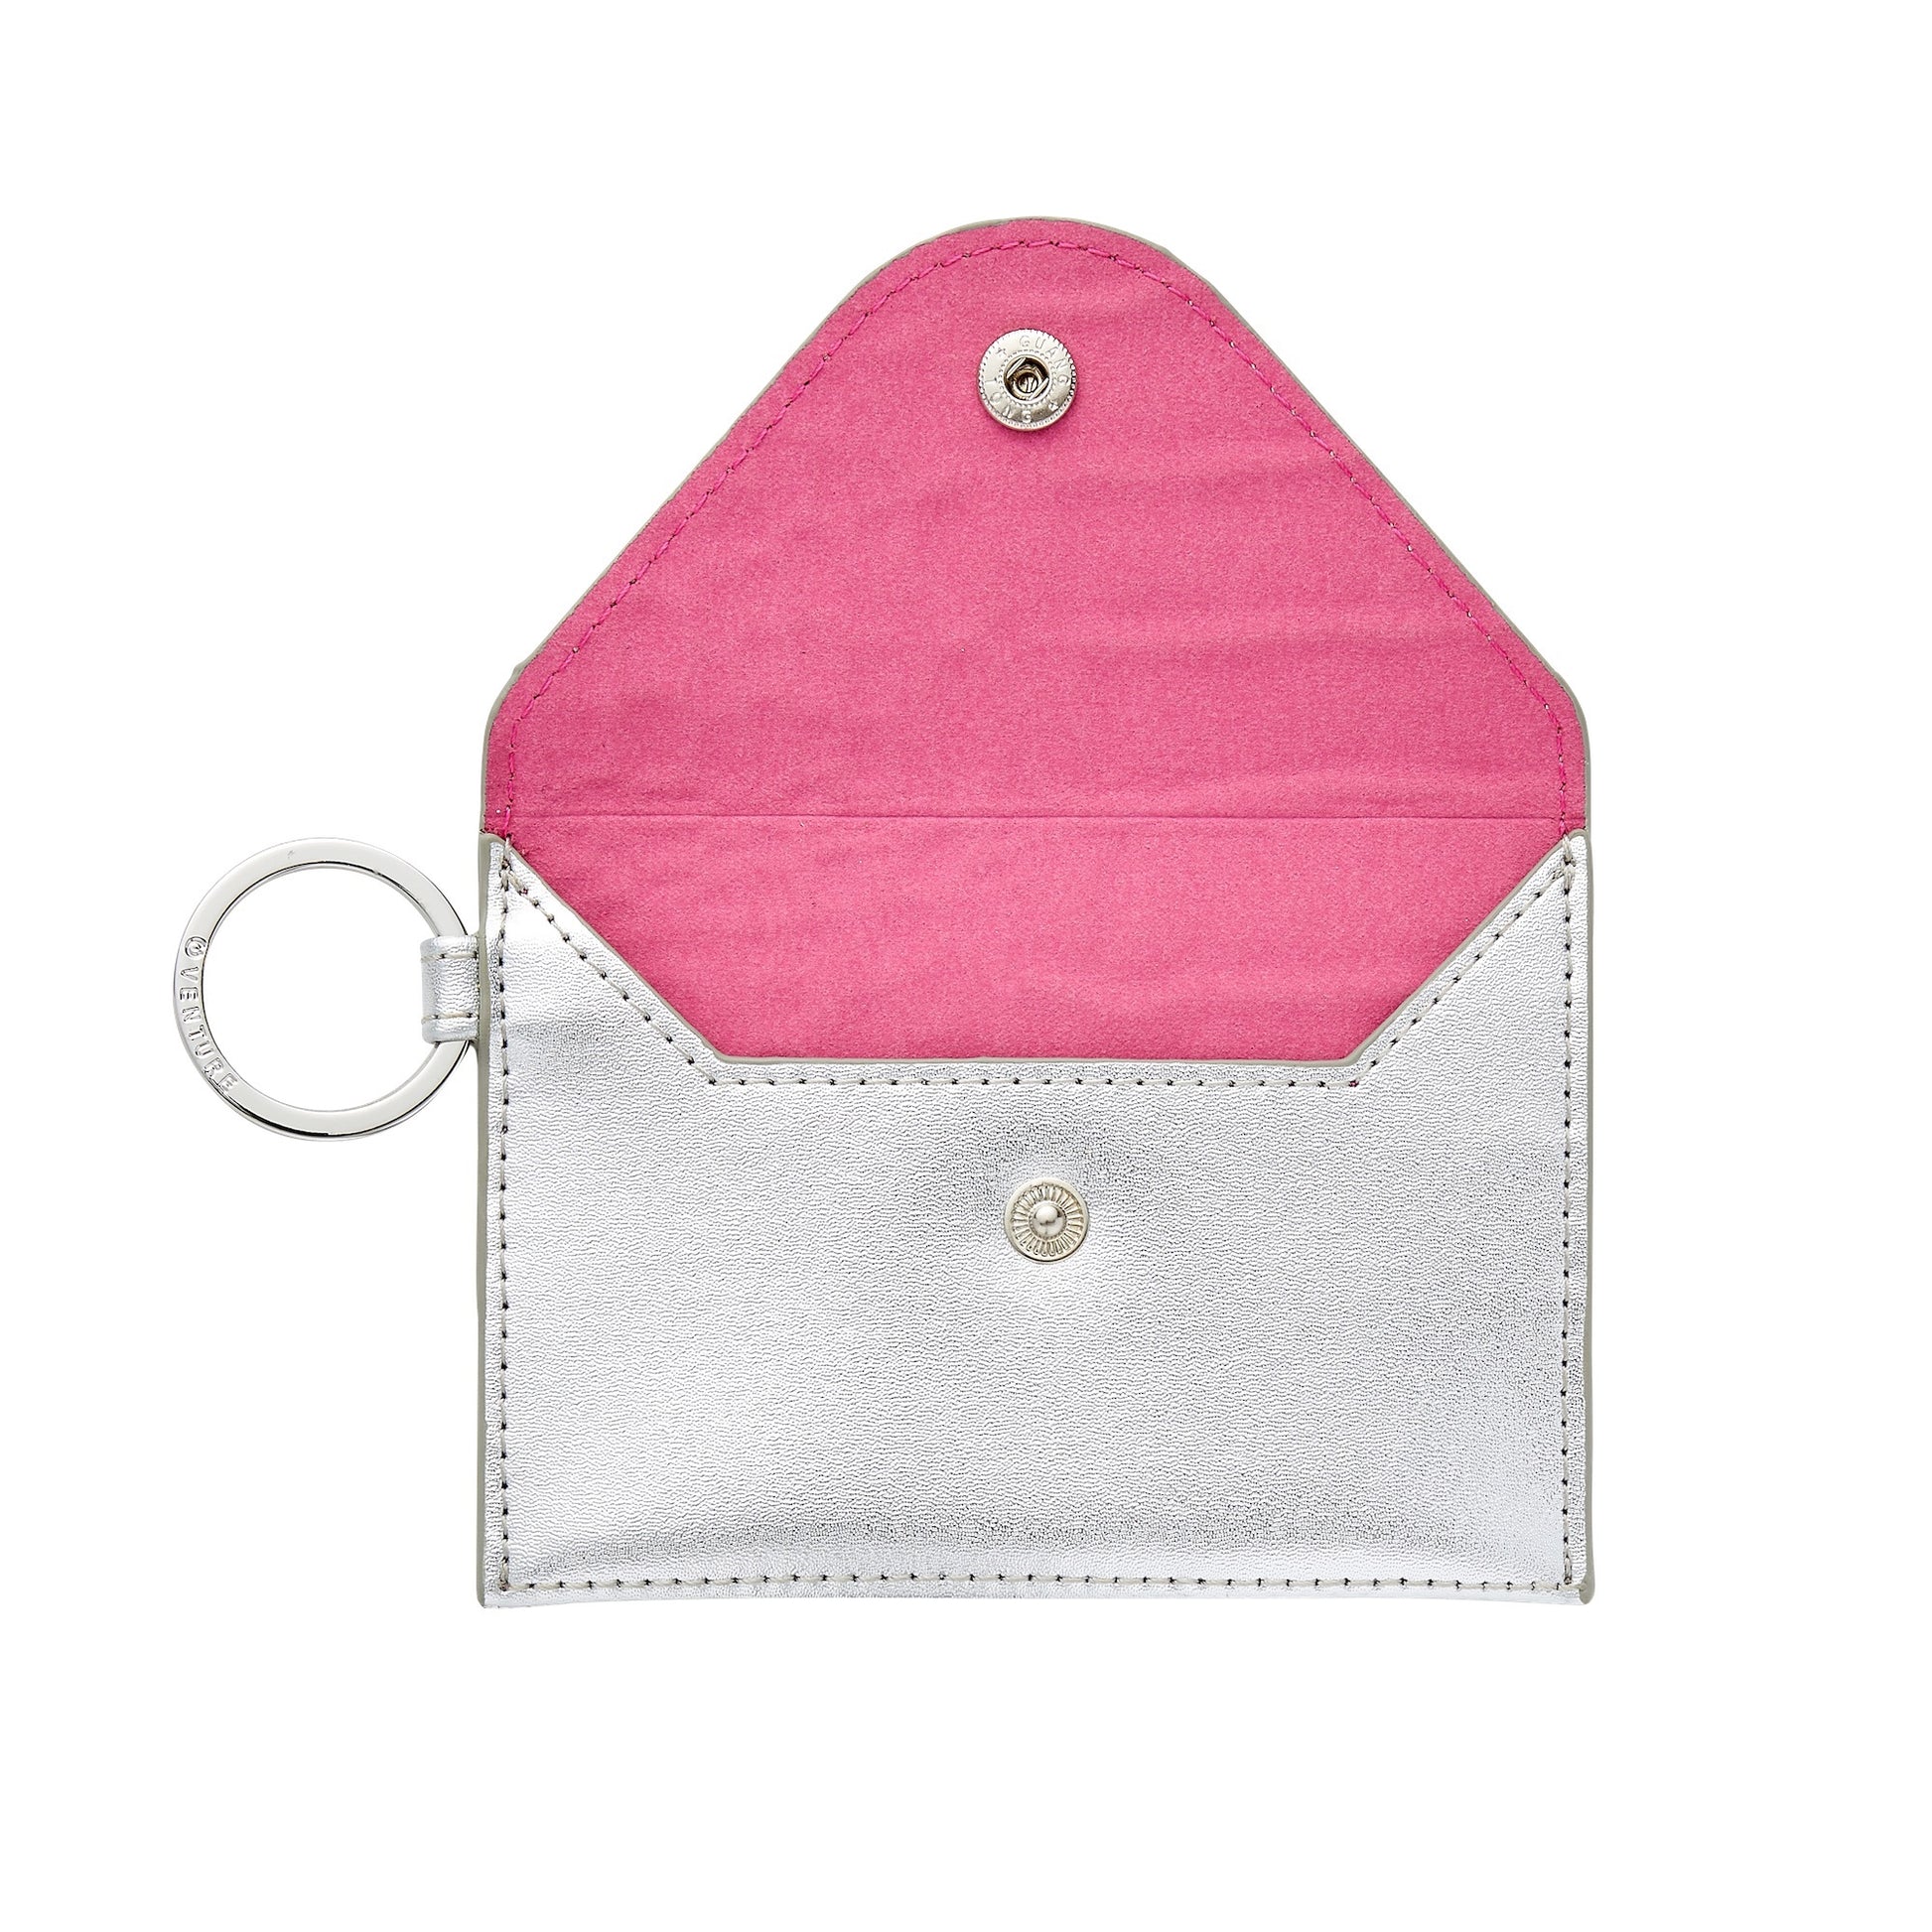 Stylish leather keychain wallet in mini envelope design showing the hot pink interior lining of the silver mini wallet